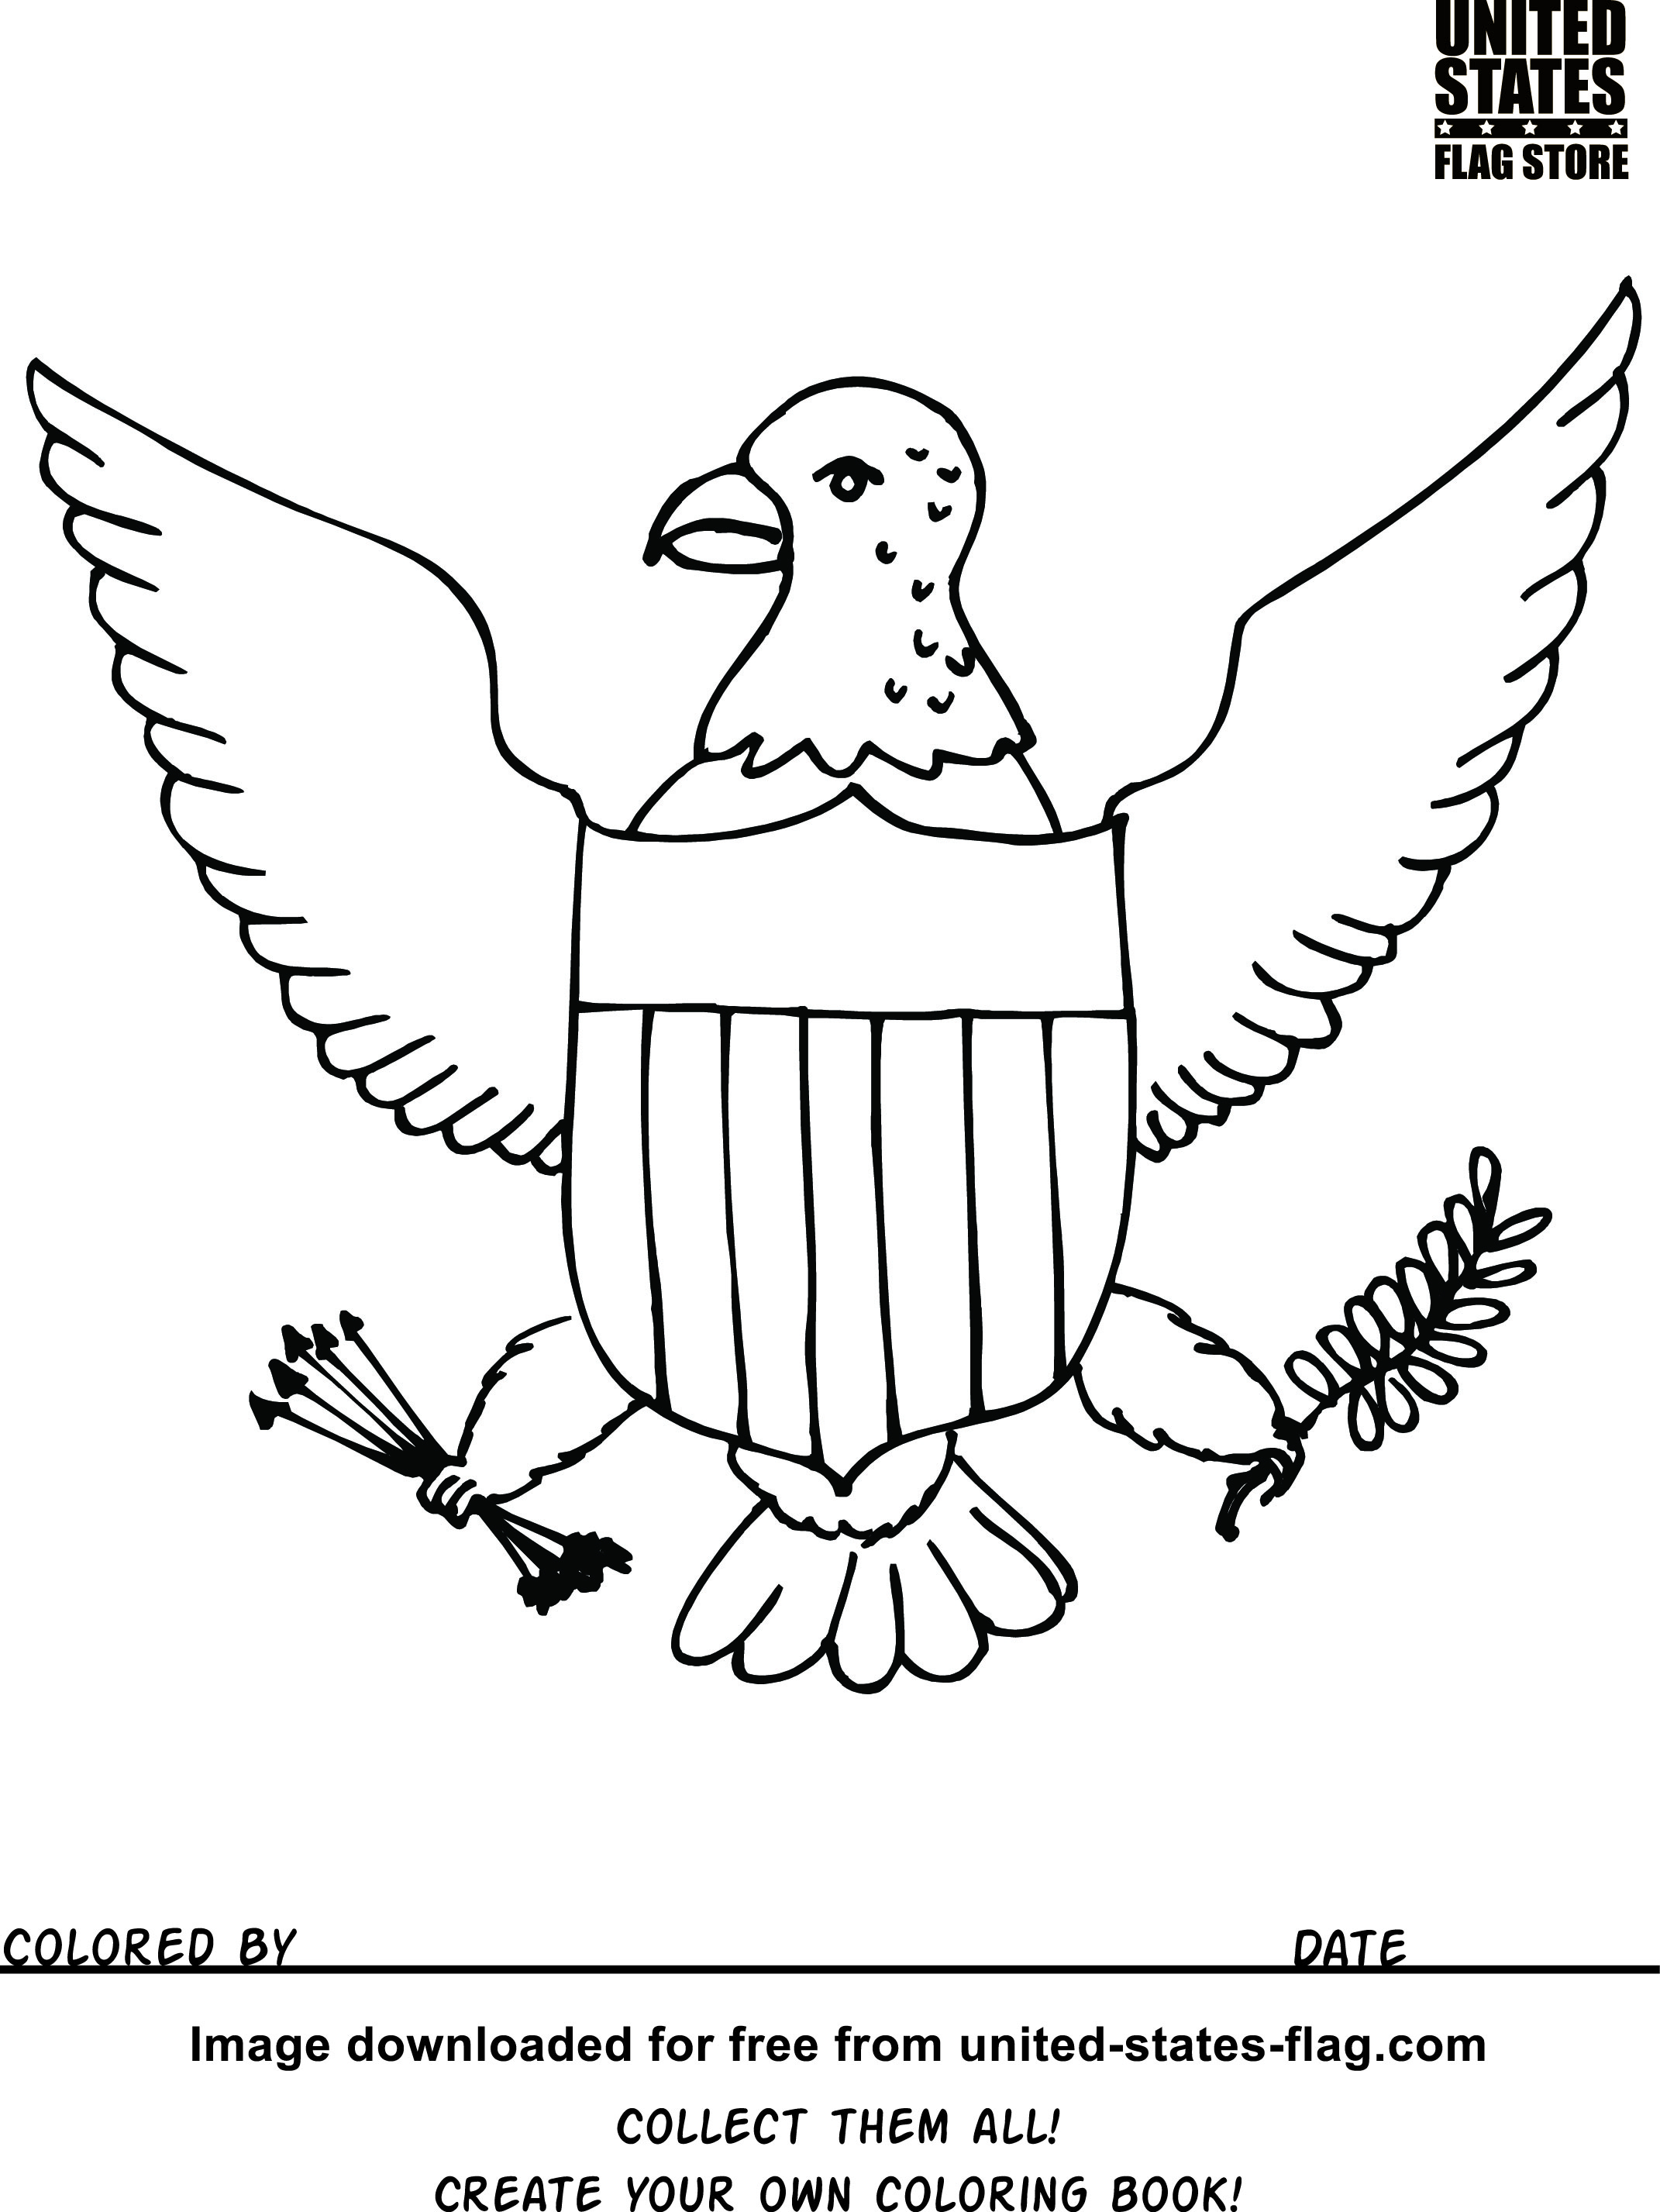 The American Flag Coloring Page Free American Flag Coloring Pages